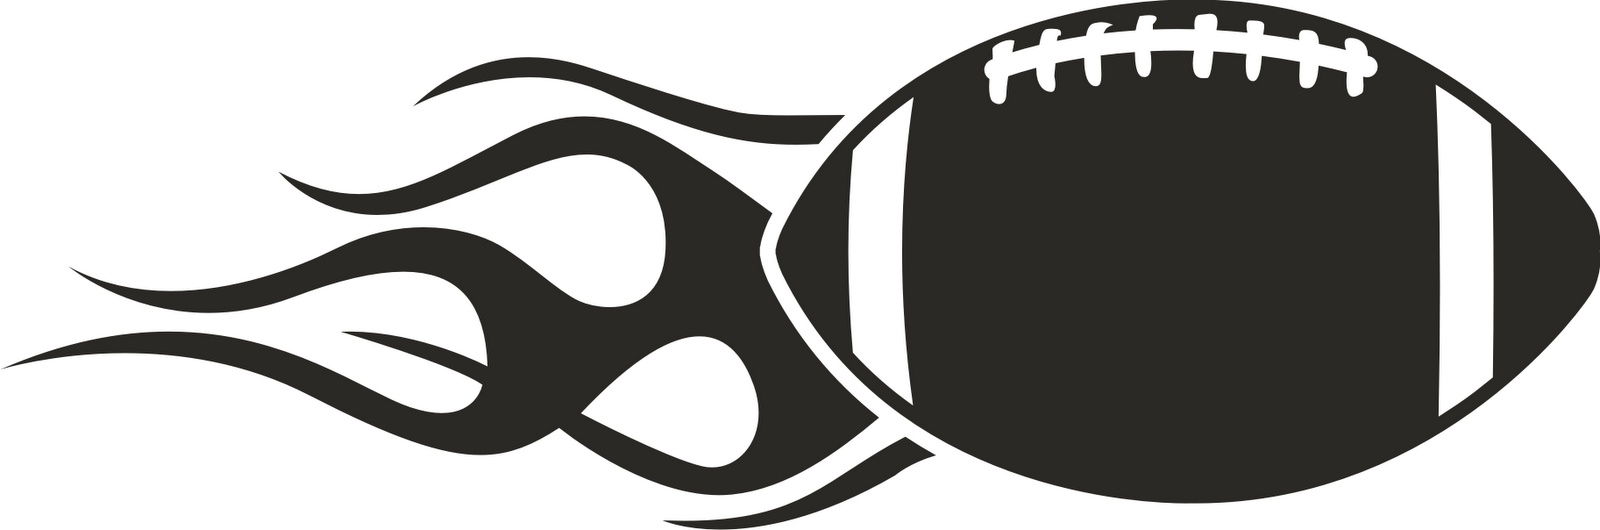 Free black and white football clipart